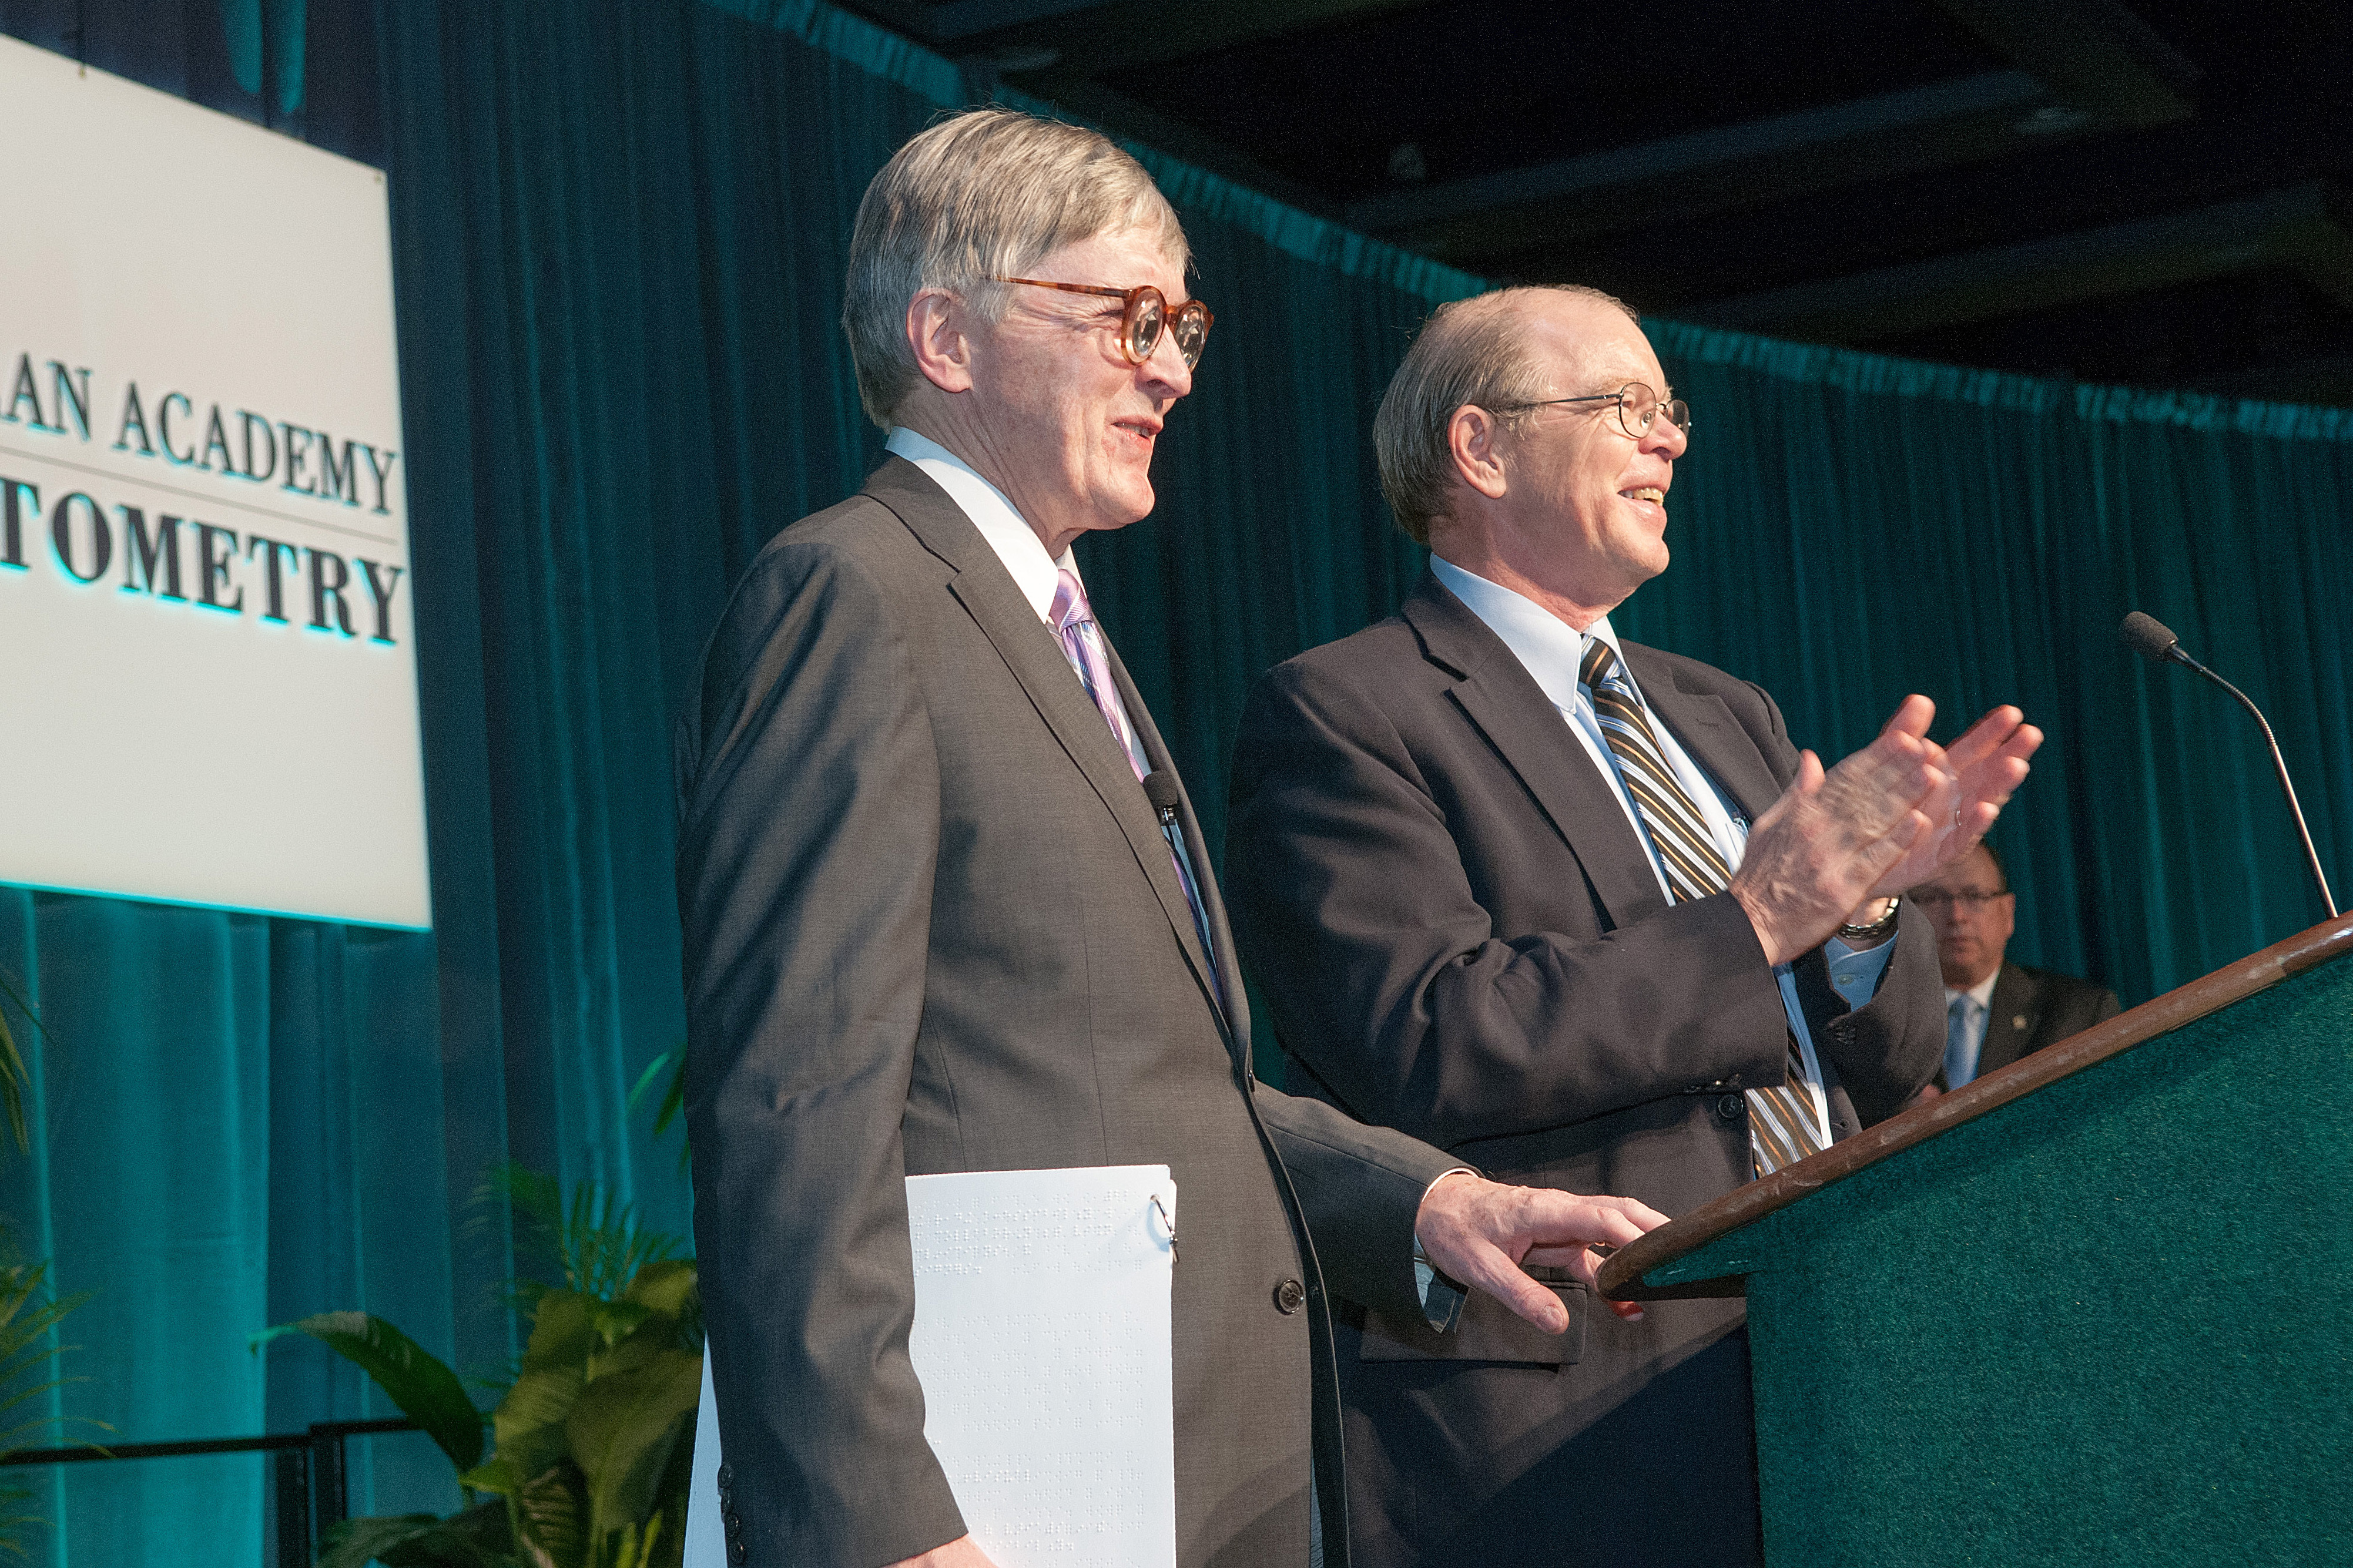 Gordon being introduced by Chris Johnson at the 2013 Prentice Award Lecture